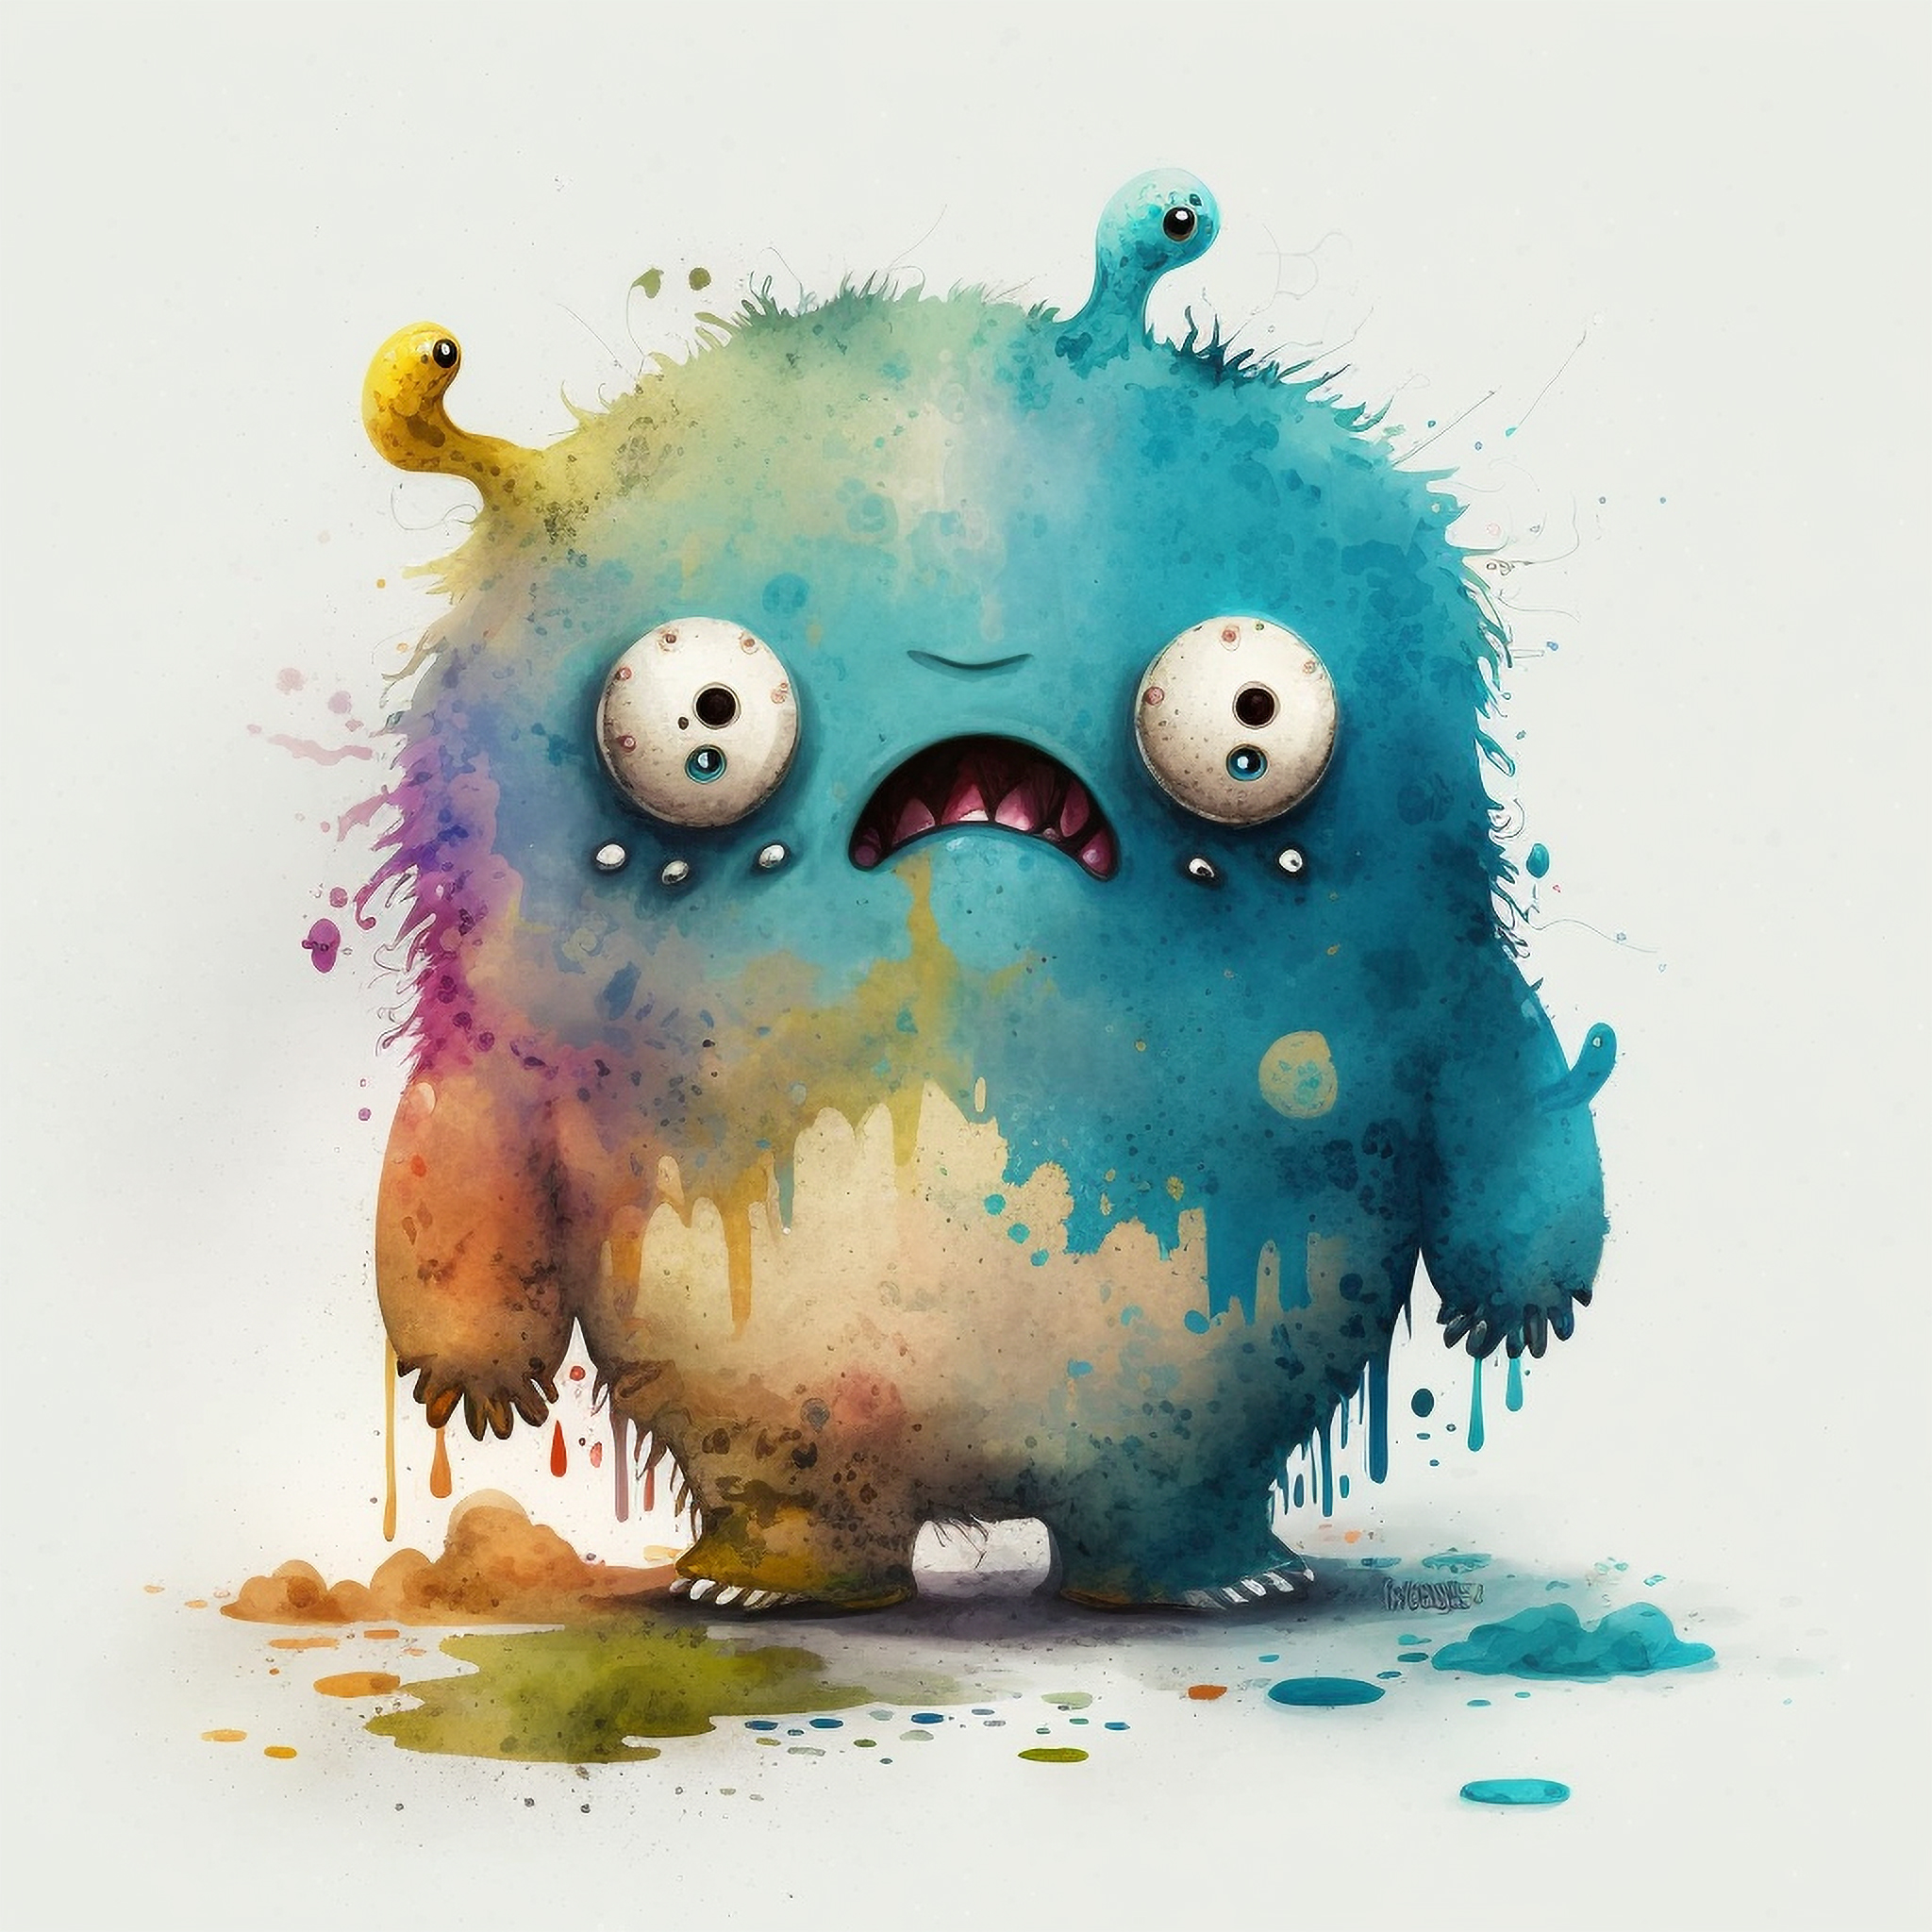 2d_watercolor_cute_monster__44fa2e09-31bf-4e96-93af-cb103be0175a